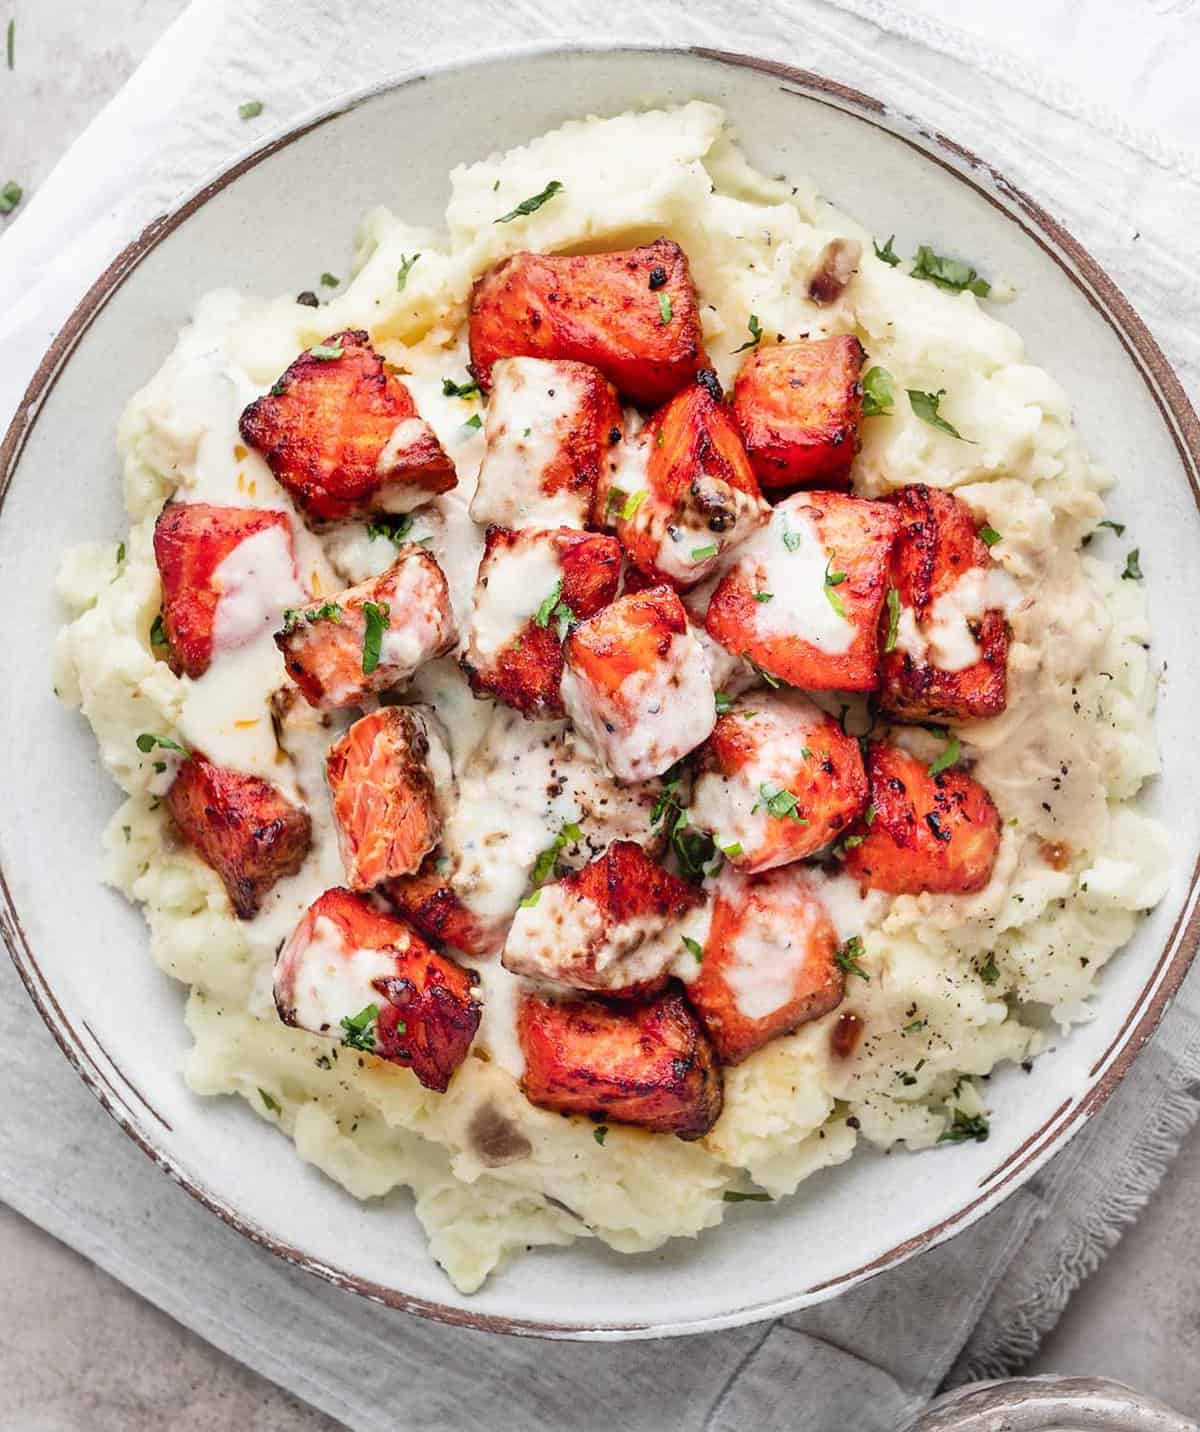 Air fryer salmon bites with garlic cream sauce are served with mashed potatoes.